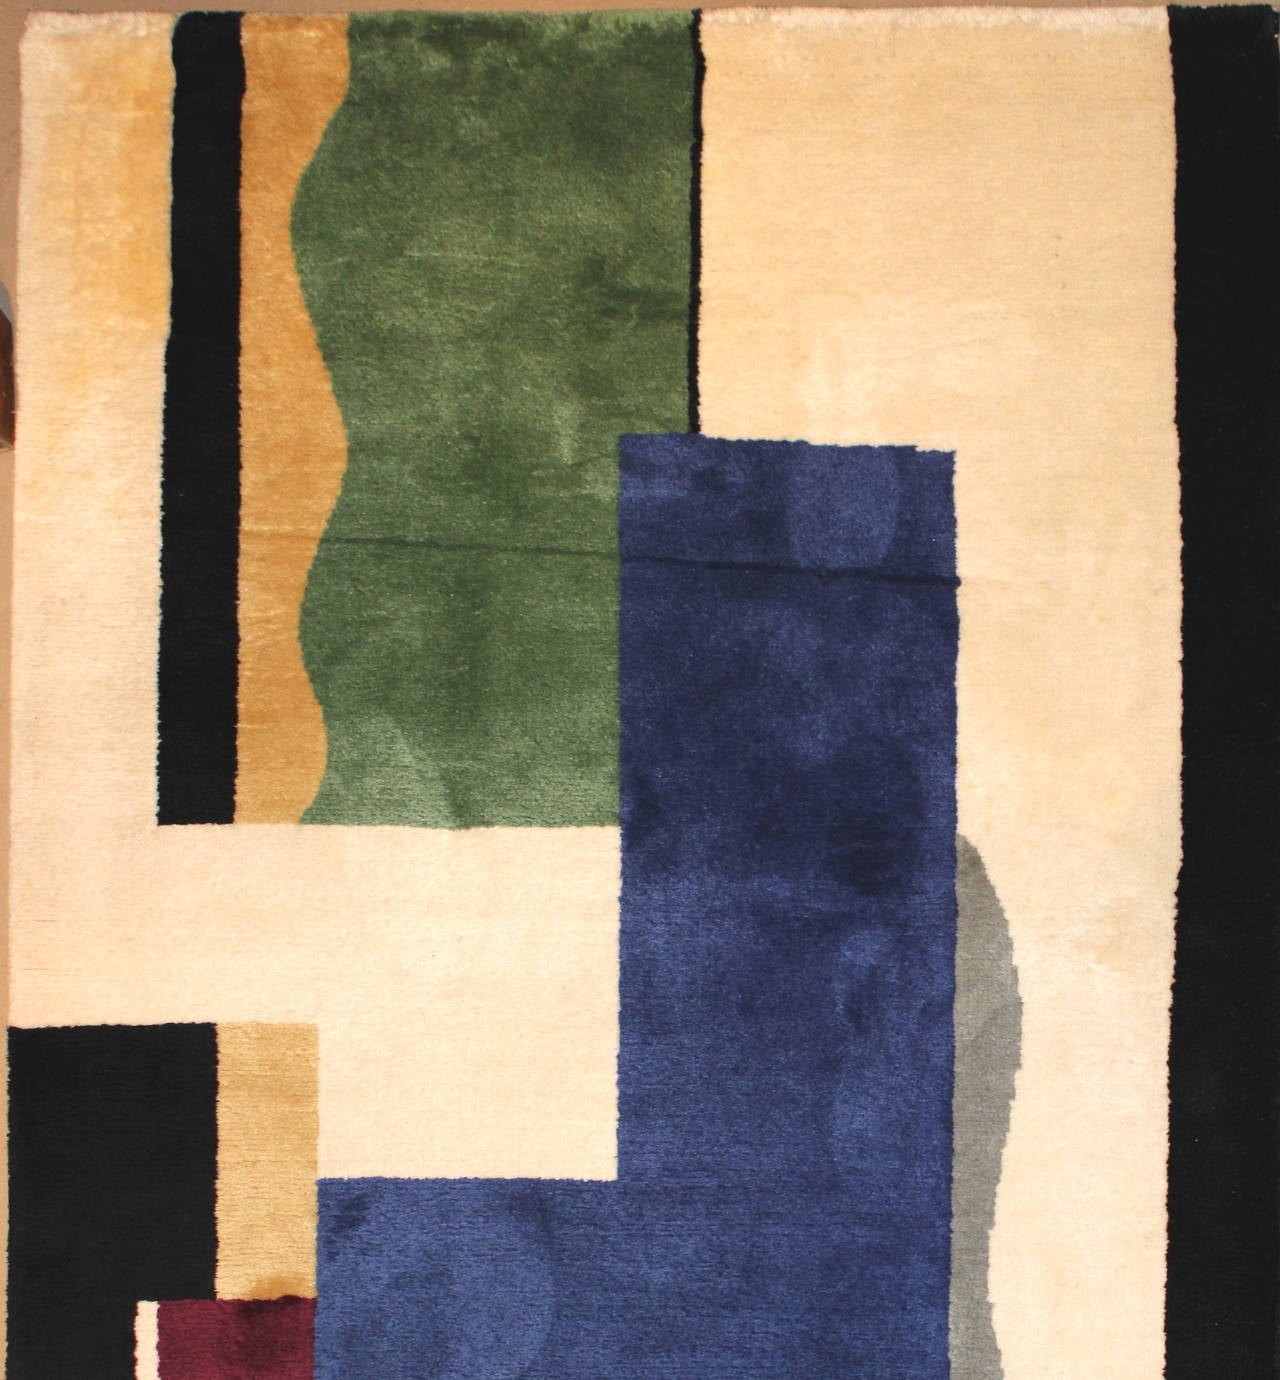 This wool carpet, rug or tapestry titled “Blanc” was conceived from a cartoon drawing prior to 1930 by French artist Fernand Leger (1881-1955). Leger was born in Normandy, France and went on to become one of the major cubist painters in France in